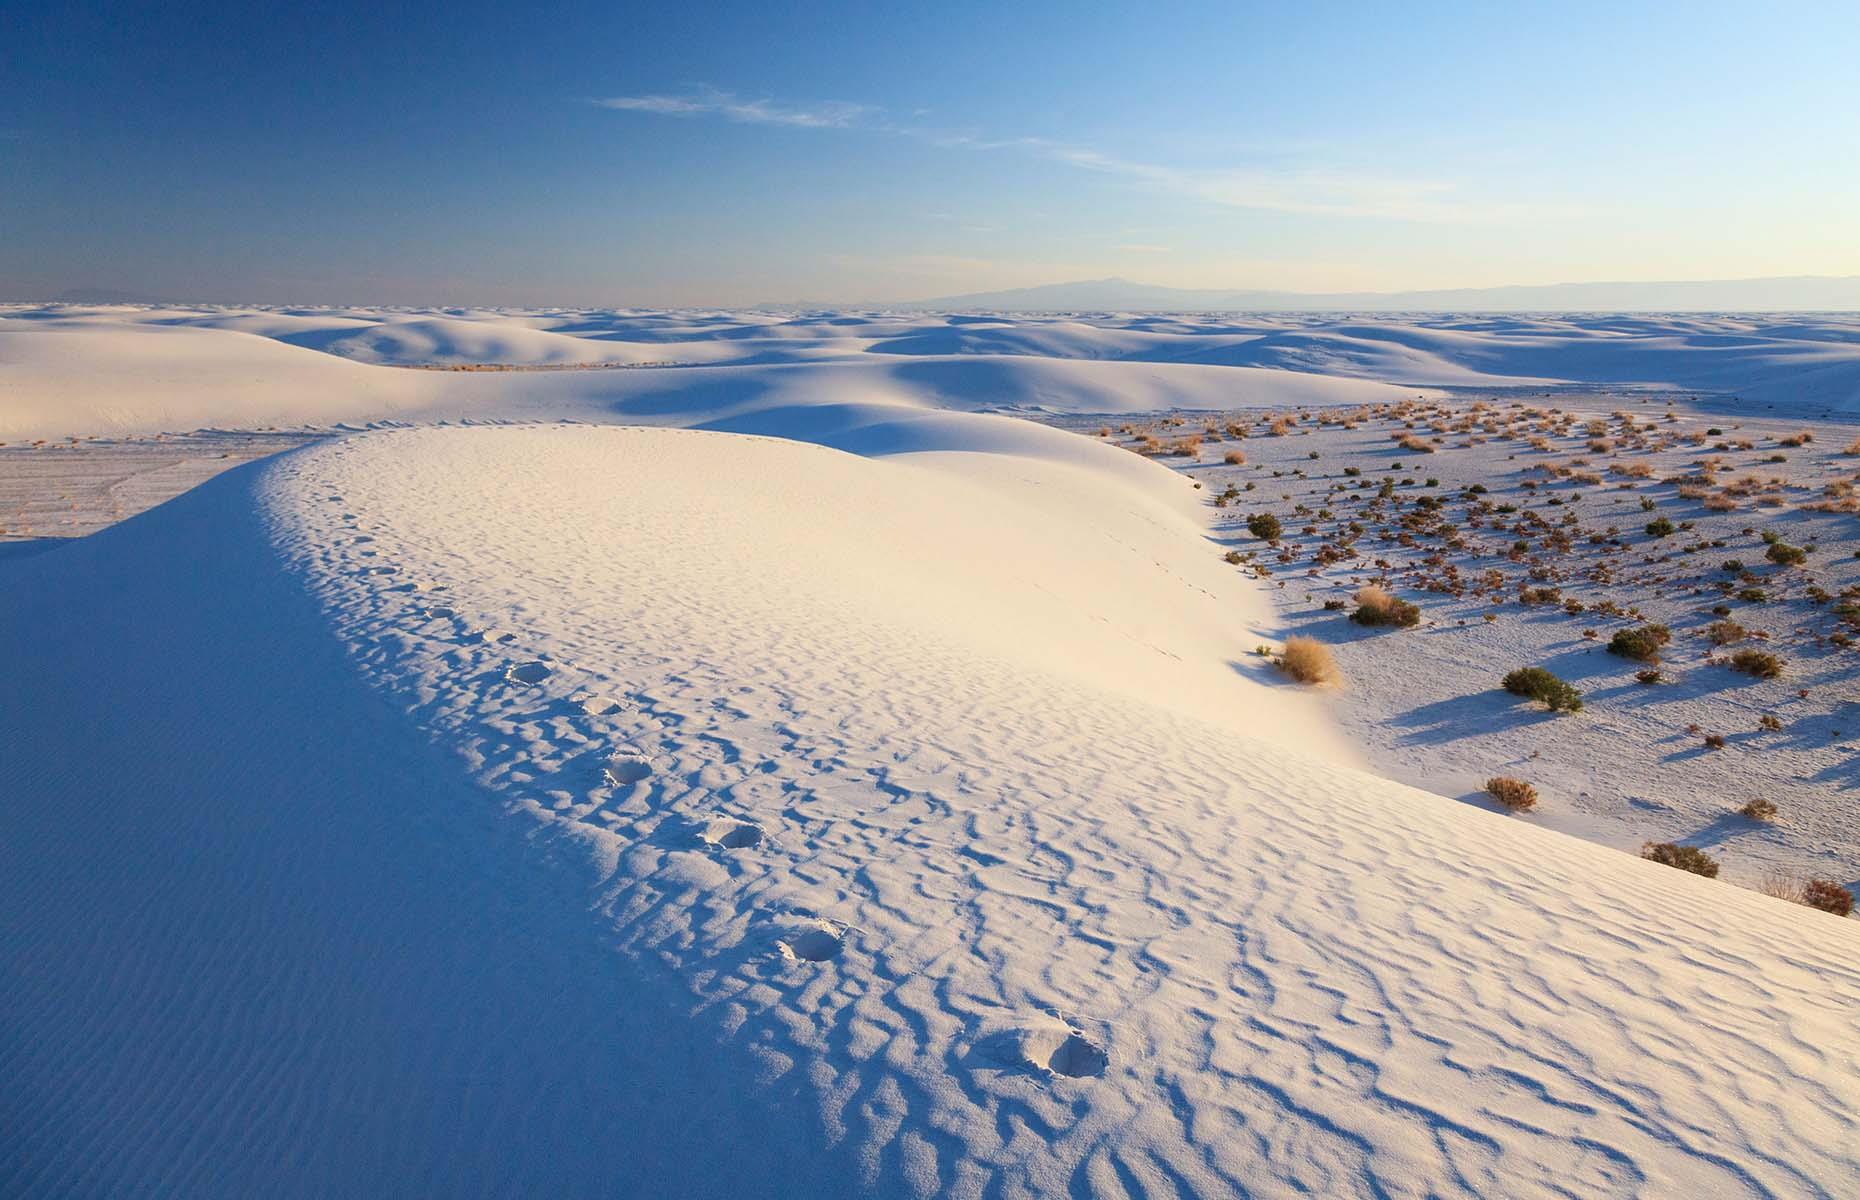 Mystical and magical, the expansive desert of White Sands National Park is one of nature’s most unusual marvels. Covering 275 square miles (712sq km) inside New Mexico's Tularosa Basin, the dunes are formed from gypsum sand – a rare mineral found in only a few locations on Earth. The sand dissolves in water but luckily the state's dry climate is the perfect breeding ground for this unique and wonderful material.